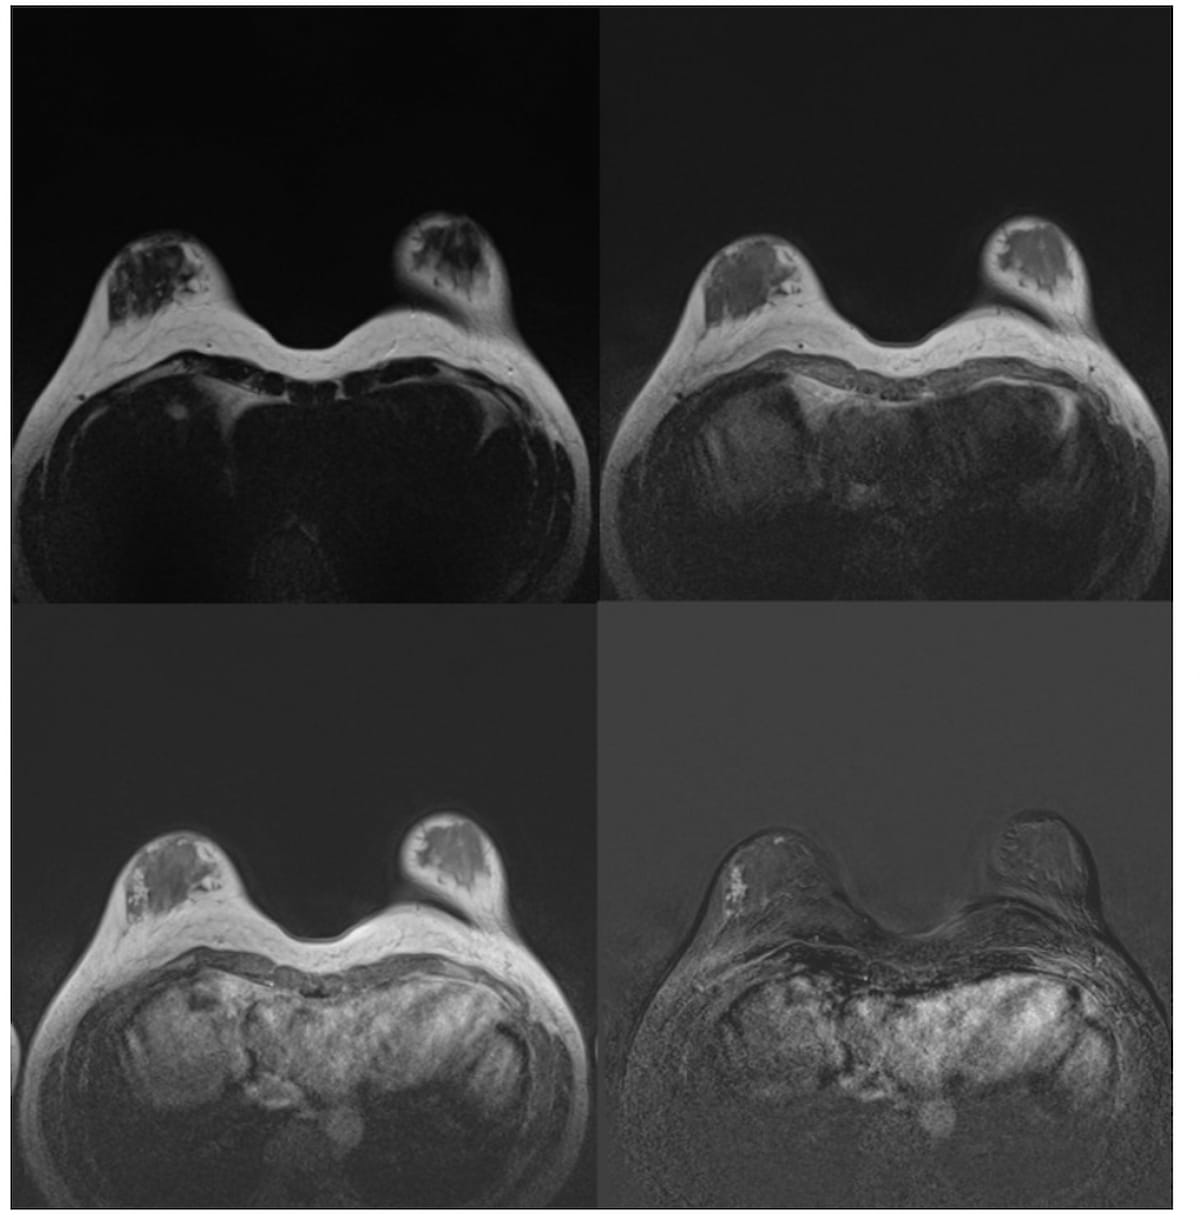 Breast MRI and Dense Breasts: A Closer Look at Early Findings from a New Prospective Trial 